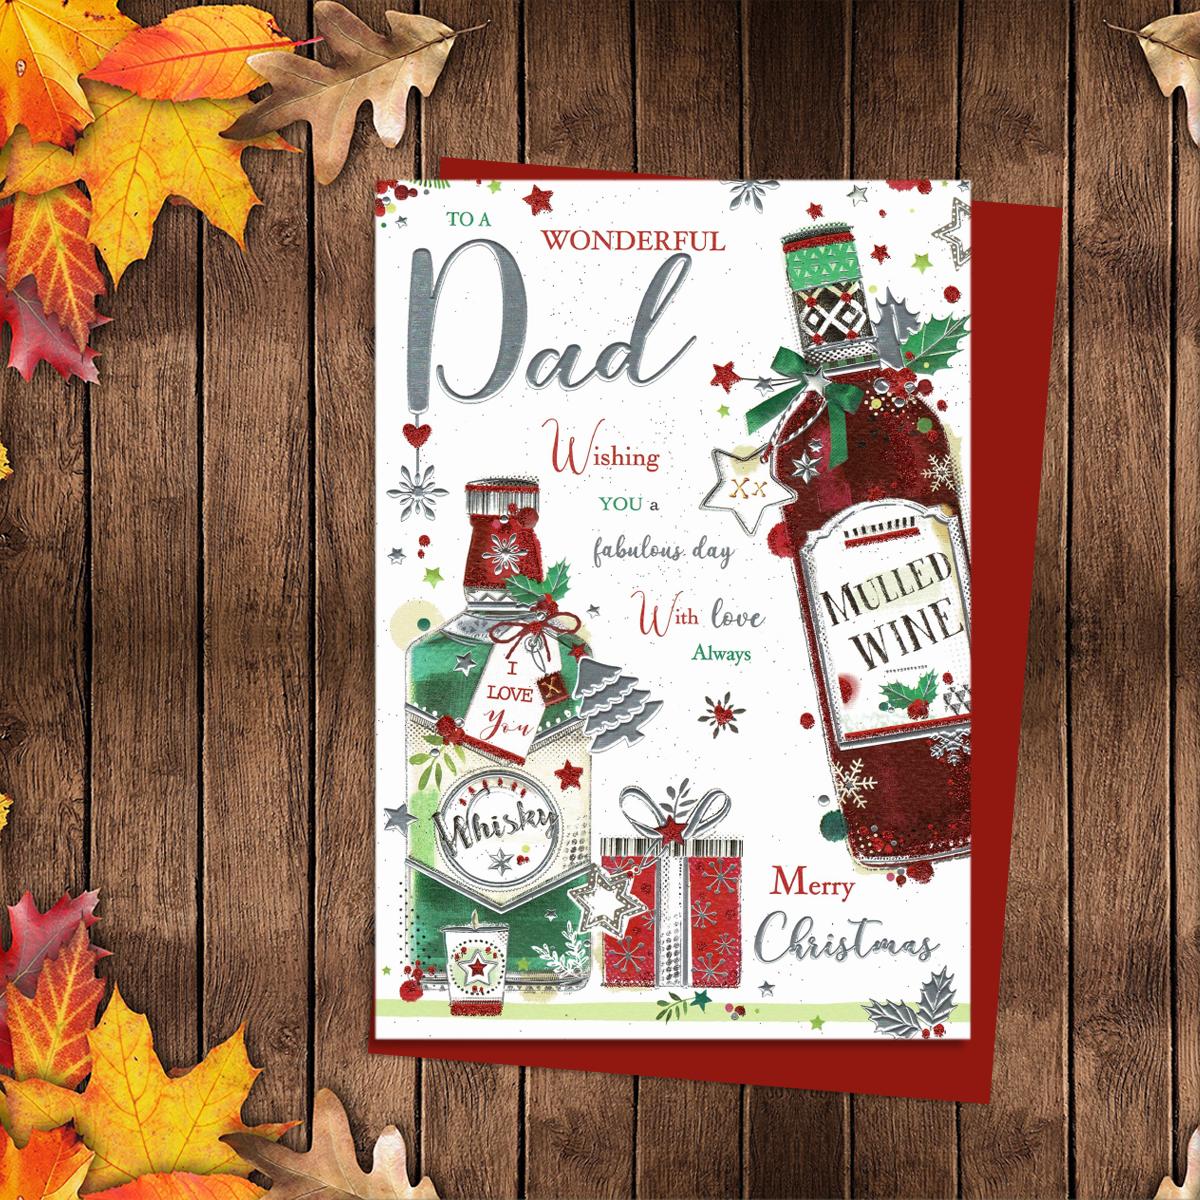 To A Wonderful Dad Merry Christmas Featuring A Bottle Of Whisky And Mulled Wine. Finished With Silver Foil Details And Red Glitter. A Red Envelope Completes The Look!